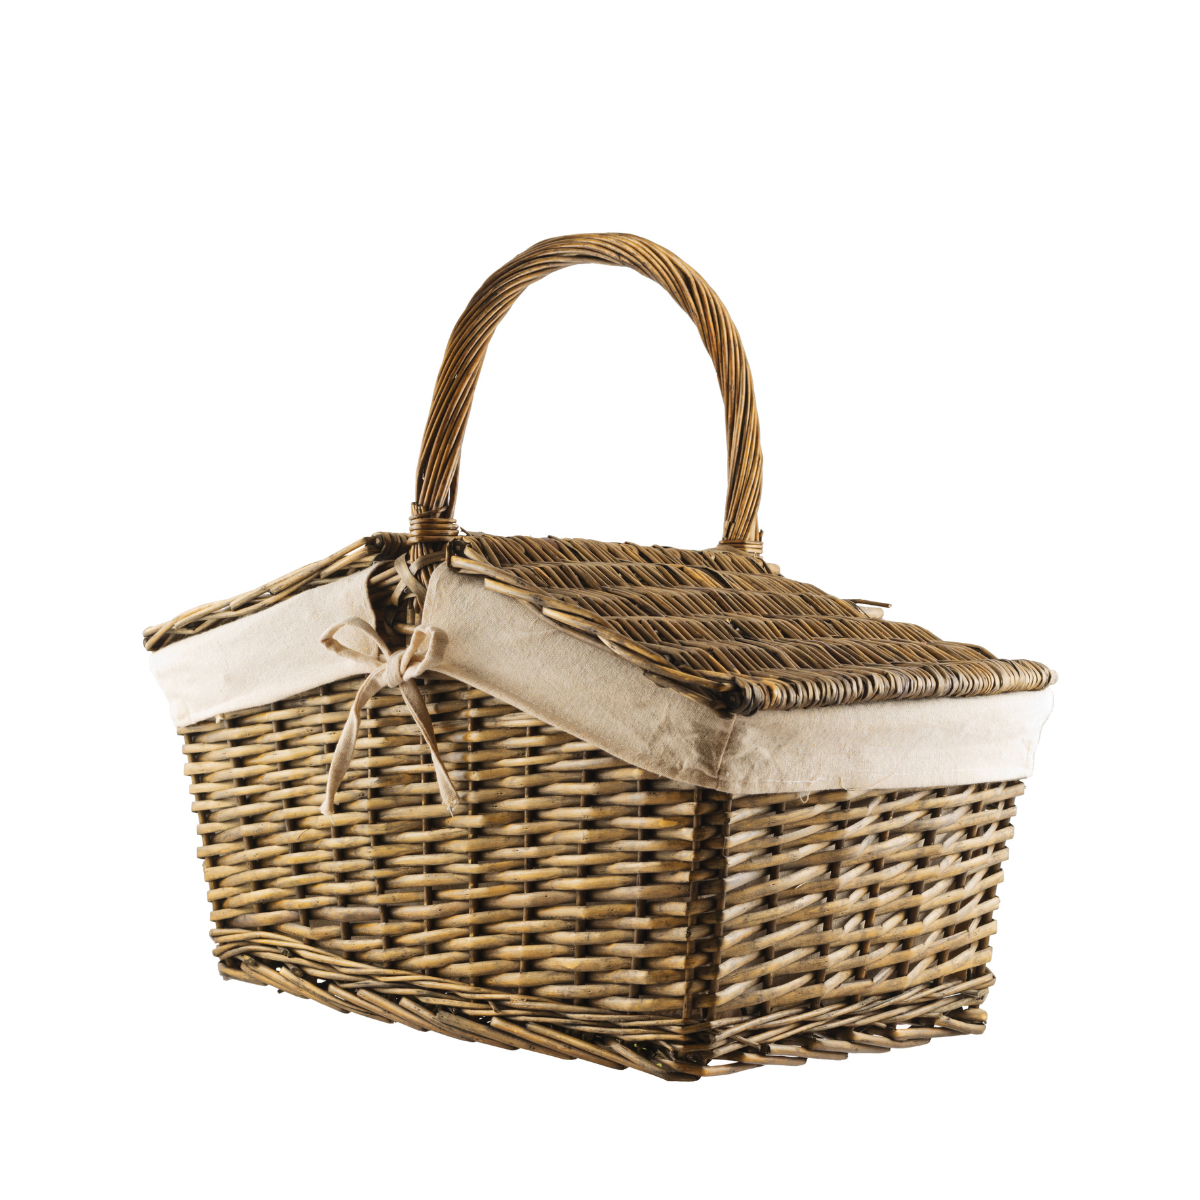 23. Create Cherished Memories with a Weekend Picnic Basket - The Perfect 20th Anniversary Gift for Wife